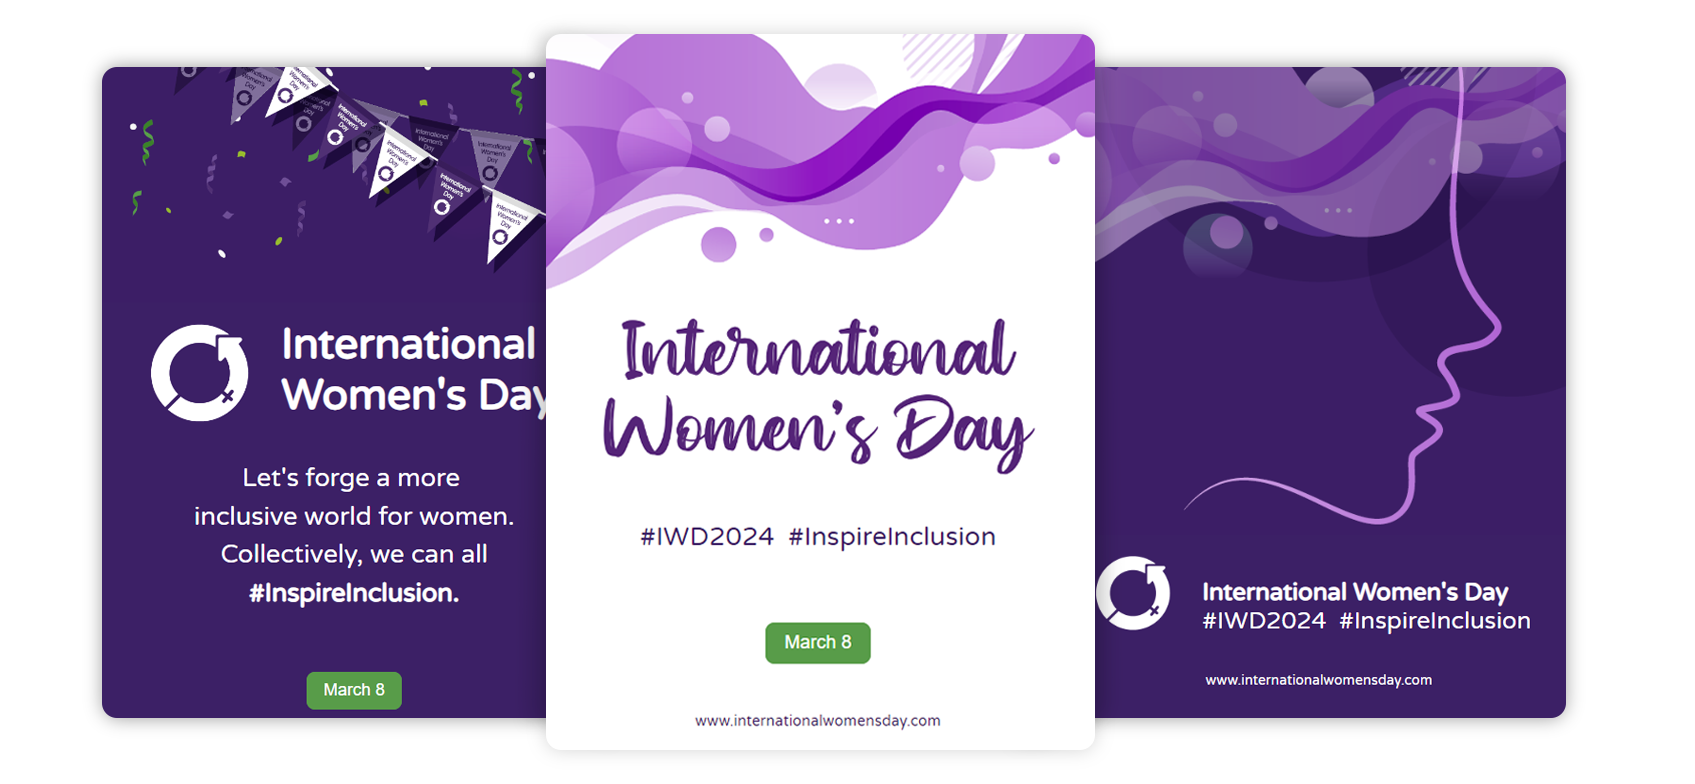 Email Library Campaign: International Women's Day 2024